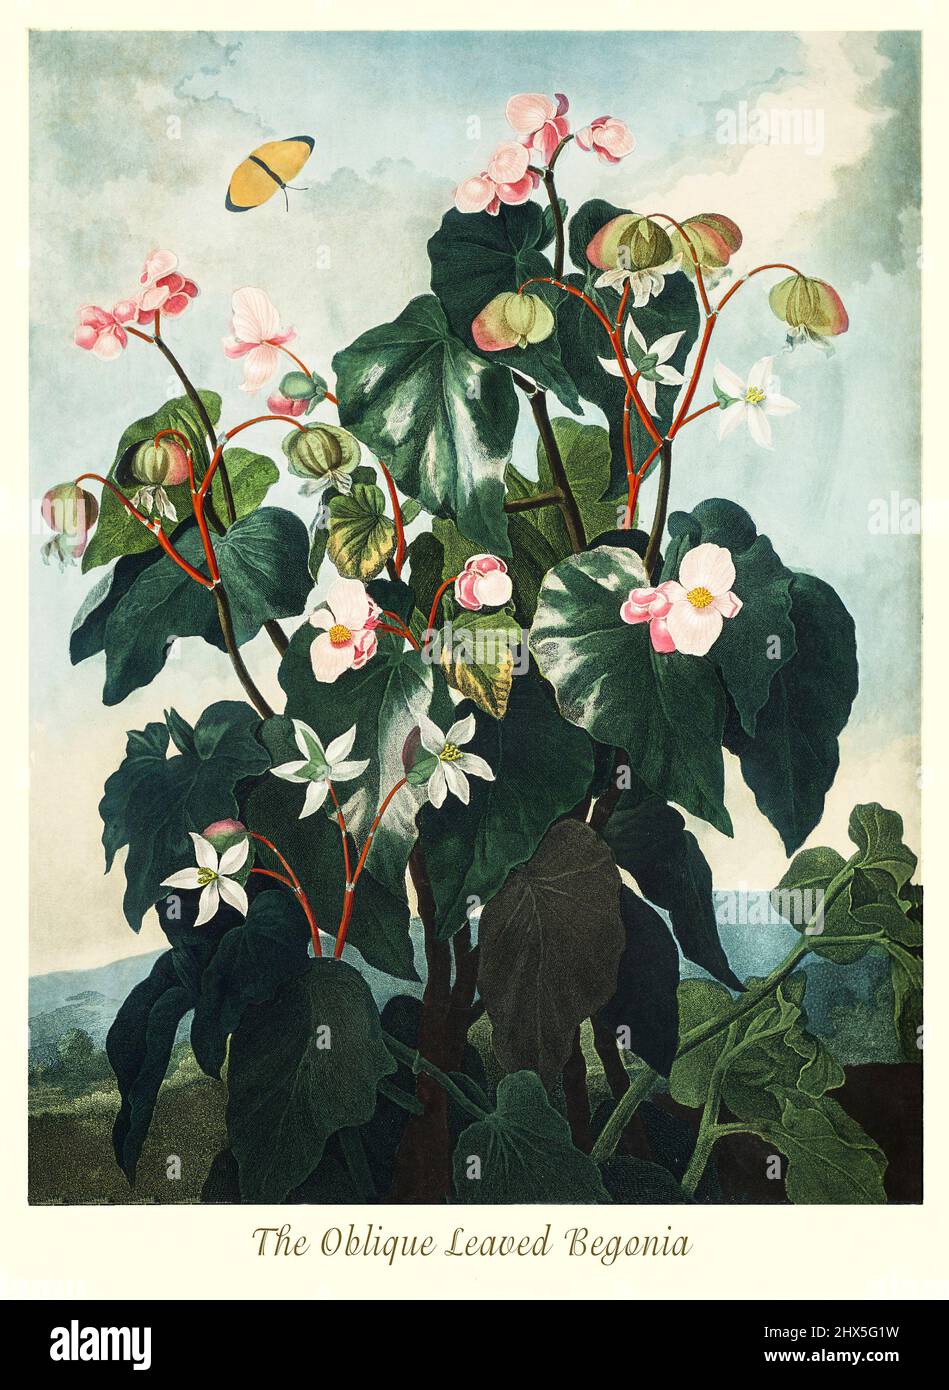 An early 19th century  illustration of the Oblique-Leaved Begonia aka Begonia nitidia was brought from Jamaica by Sir Joseph Banks. Regarded as a fine plant then, it played an important part in the breeding of the modern small-flowered bedding begonias, Begonis semperflorens. This artwork for Robert John Thornton's 'The Temple of Flora' in 1807, was printed, for the publisher, by T. Bensley, London, England. Stock Photo